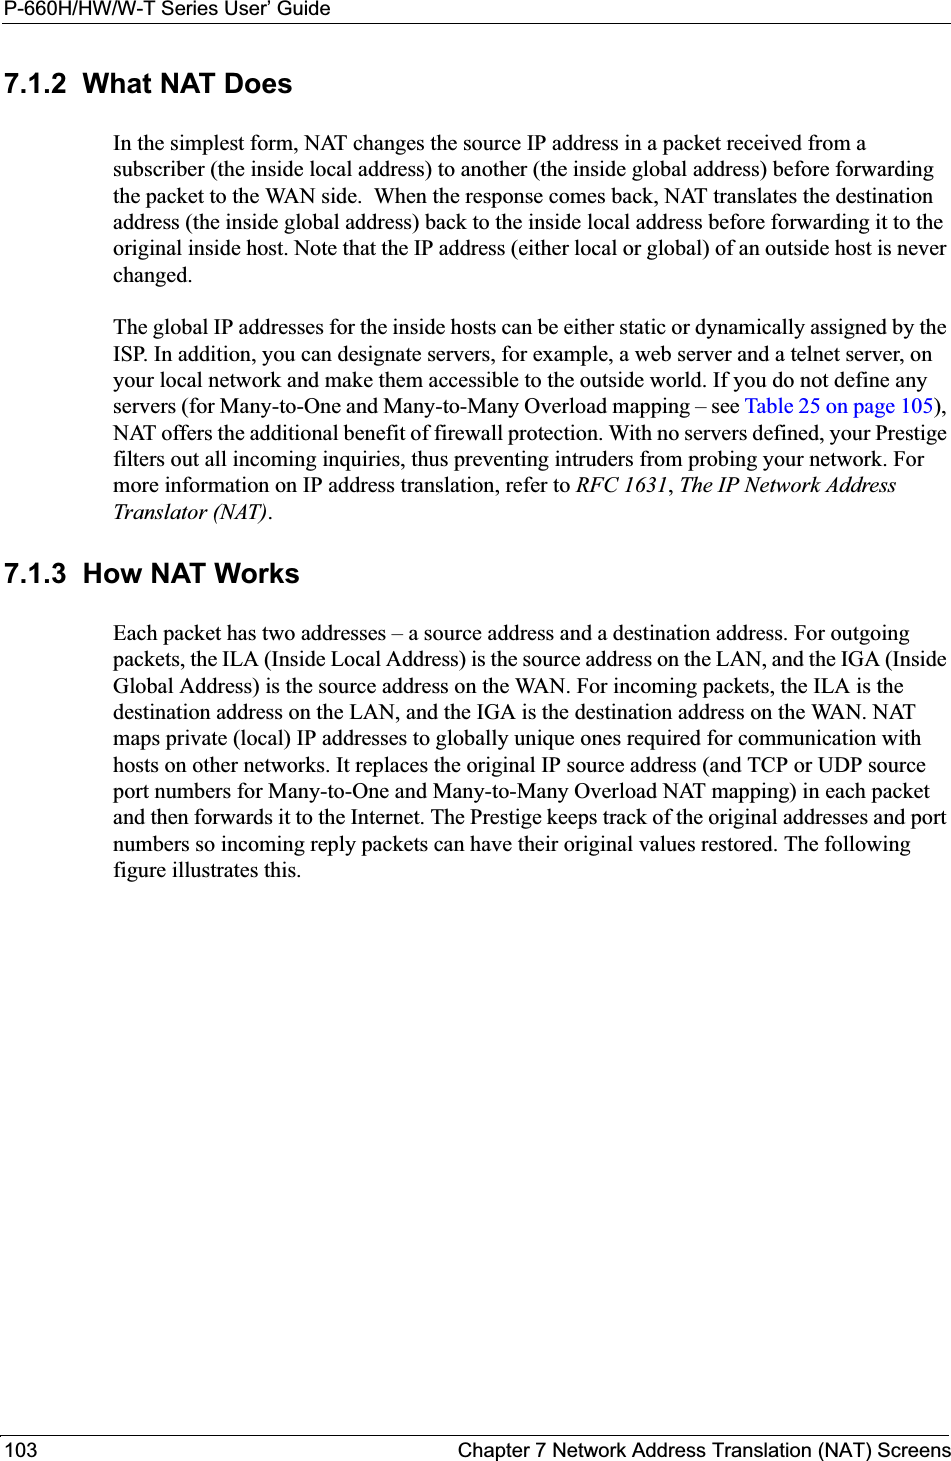 P-660H/HW/W-T Series User’ Guide103 Chapter 7 Network Address Translation (NAT) Screens7.1.2  What NAT DoesIn the simplest form, NAT changes the source IP address in a packet received from a subscriber (the inside local address) to another (the inside global address) before forwarding the packet to the WAN side.  When the response comes back, NAT translates the destination address (the inside global address) back to the inside local address before forwarding it to the original inside host. Note that the IP address (either local or global) of an outside host is never changed.The global IP addresses for the inside hosts can be either static or dynamically assigned by the ISP. In addition, you can designate servers, for example, a web server and a telnet server, on your local network and make them accessible to the outside world. If you do not define any servers (for Many-to-One and Many-to-Many Overload mapping – see Table 25 on page 105),NAT offers the additional benefit of firewall protection. With no servers defined, your Prestige filters out all incoming inquiries, thus preventing intruders from probing your network. For more information on IP address translation, refer to RFC 1631,The IP Network Address Translator (NAT).7.1.3  How NAT WorksEach packet has two addresses – a source address and a destination address. For outgoing packets, the ILA (Inside Local Address) is the source address on the LAN, and the IGA (Inside Global Address) is the source address on the WAN. For incoming packets, the ILA is the destination address on the LAN, and the IGA is the destination address on the WAN. NAT maps private (local) IP addresses to globally unique ones required for communication with hosts on other networks. It replaces the original IP source address (and TCP or UDP source port numbers for Many-to-One and Many-to-Many Overload NAT mapping) in each packet and then forwards it to the Internet. The Prestige keeps track of the original addresses and port numbers so incoming reply packets can have their original values restored. The following figure illustrates this.